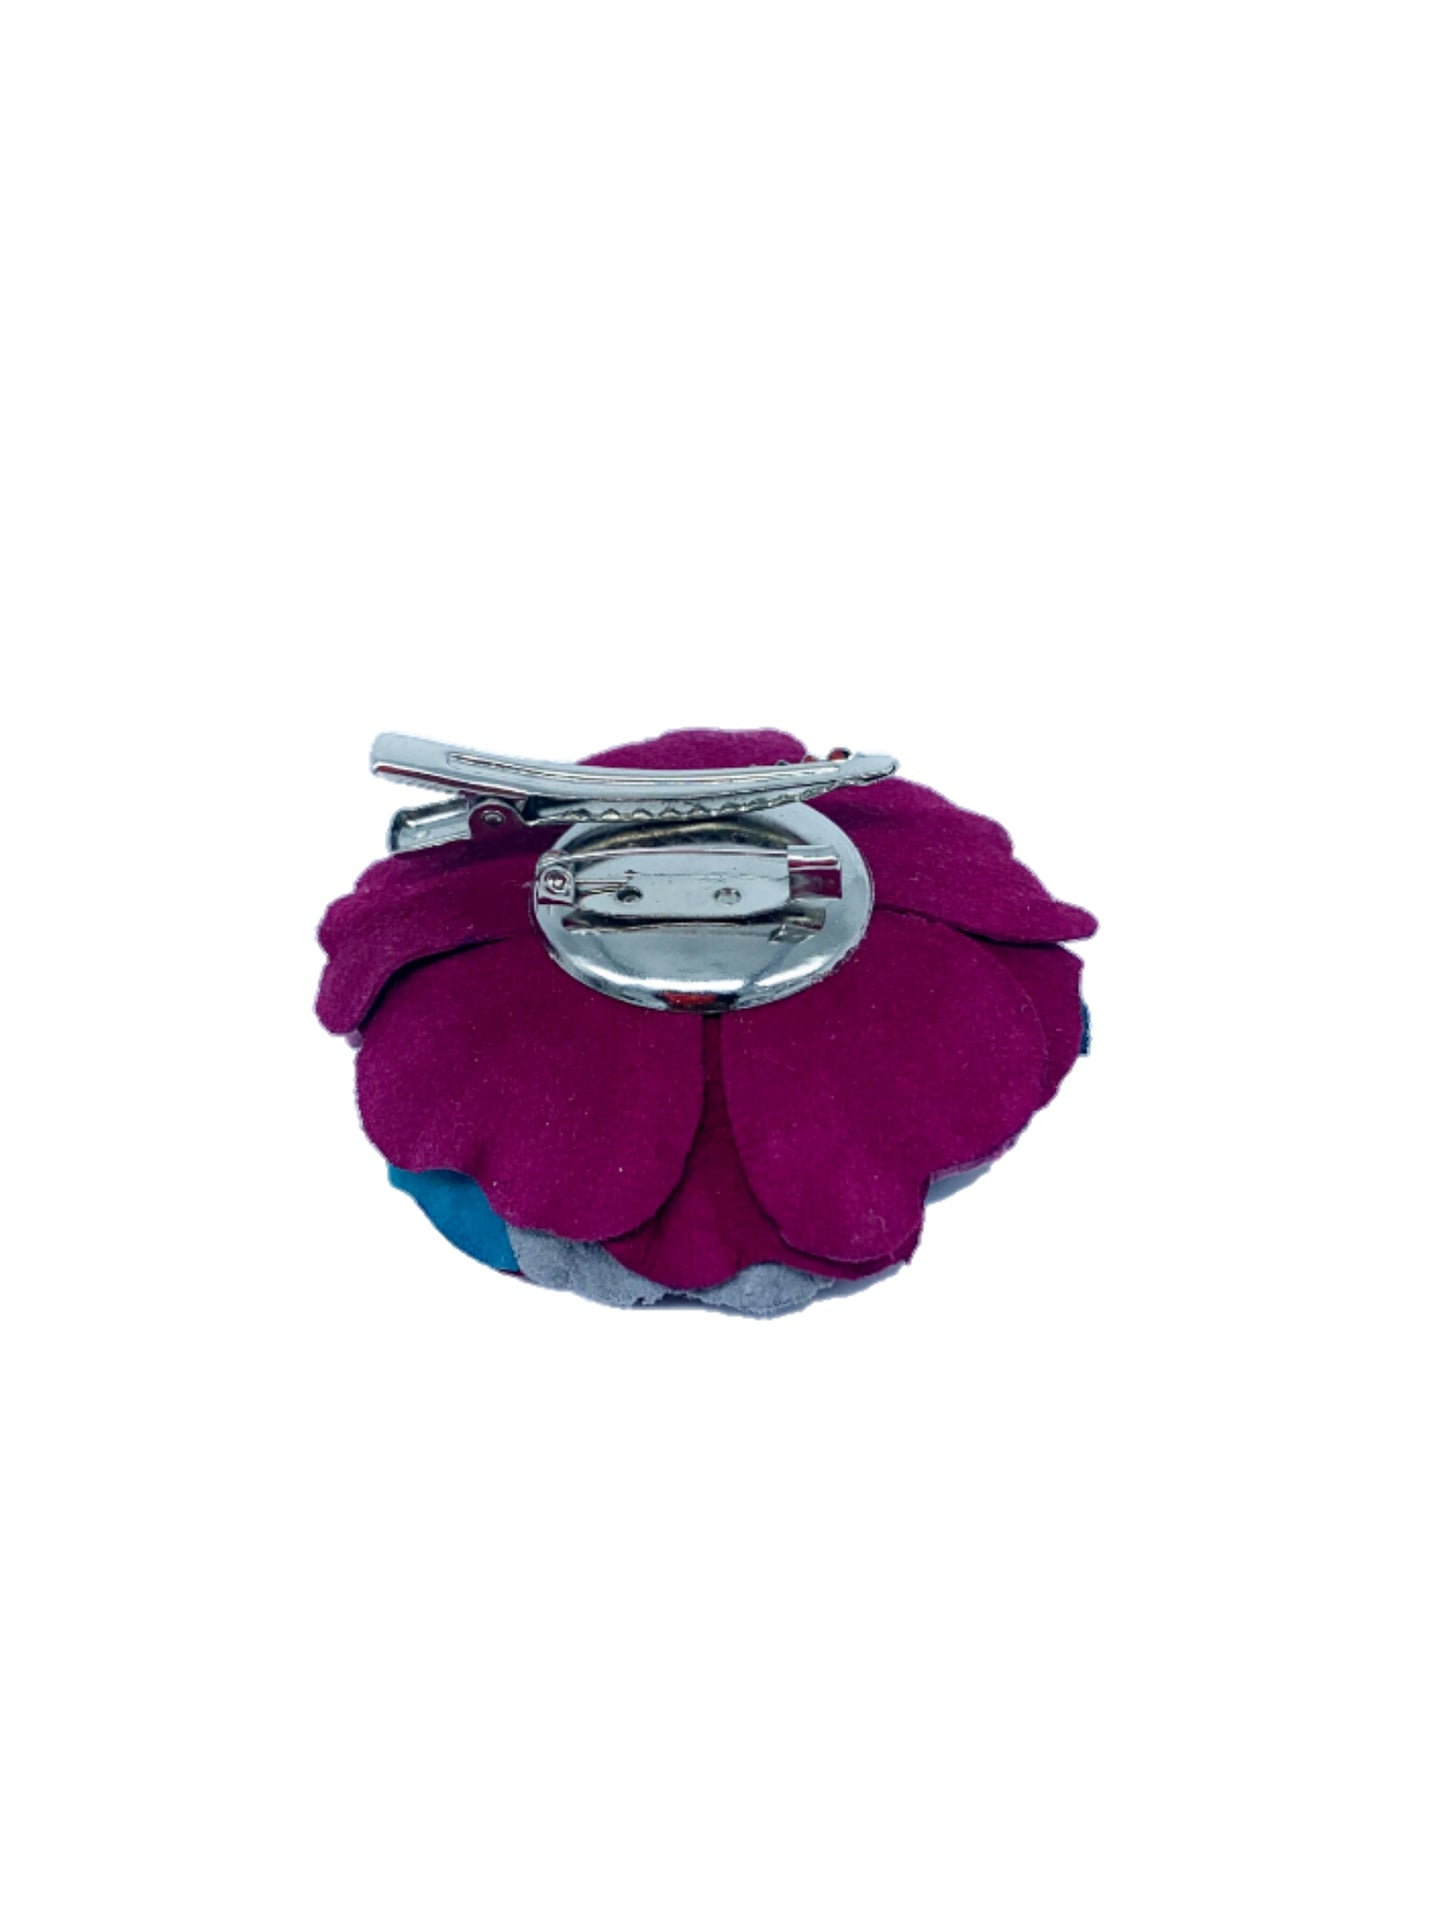 2 in 1 Leather flower brooch and hair pin combination